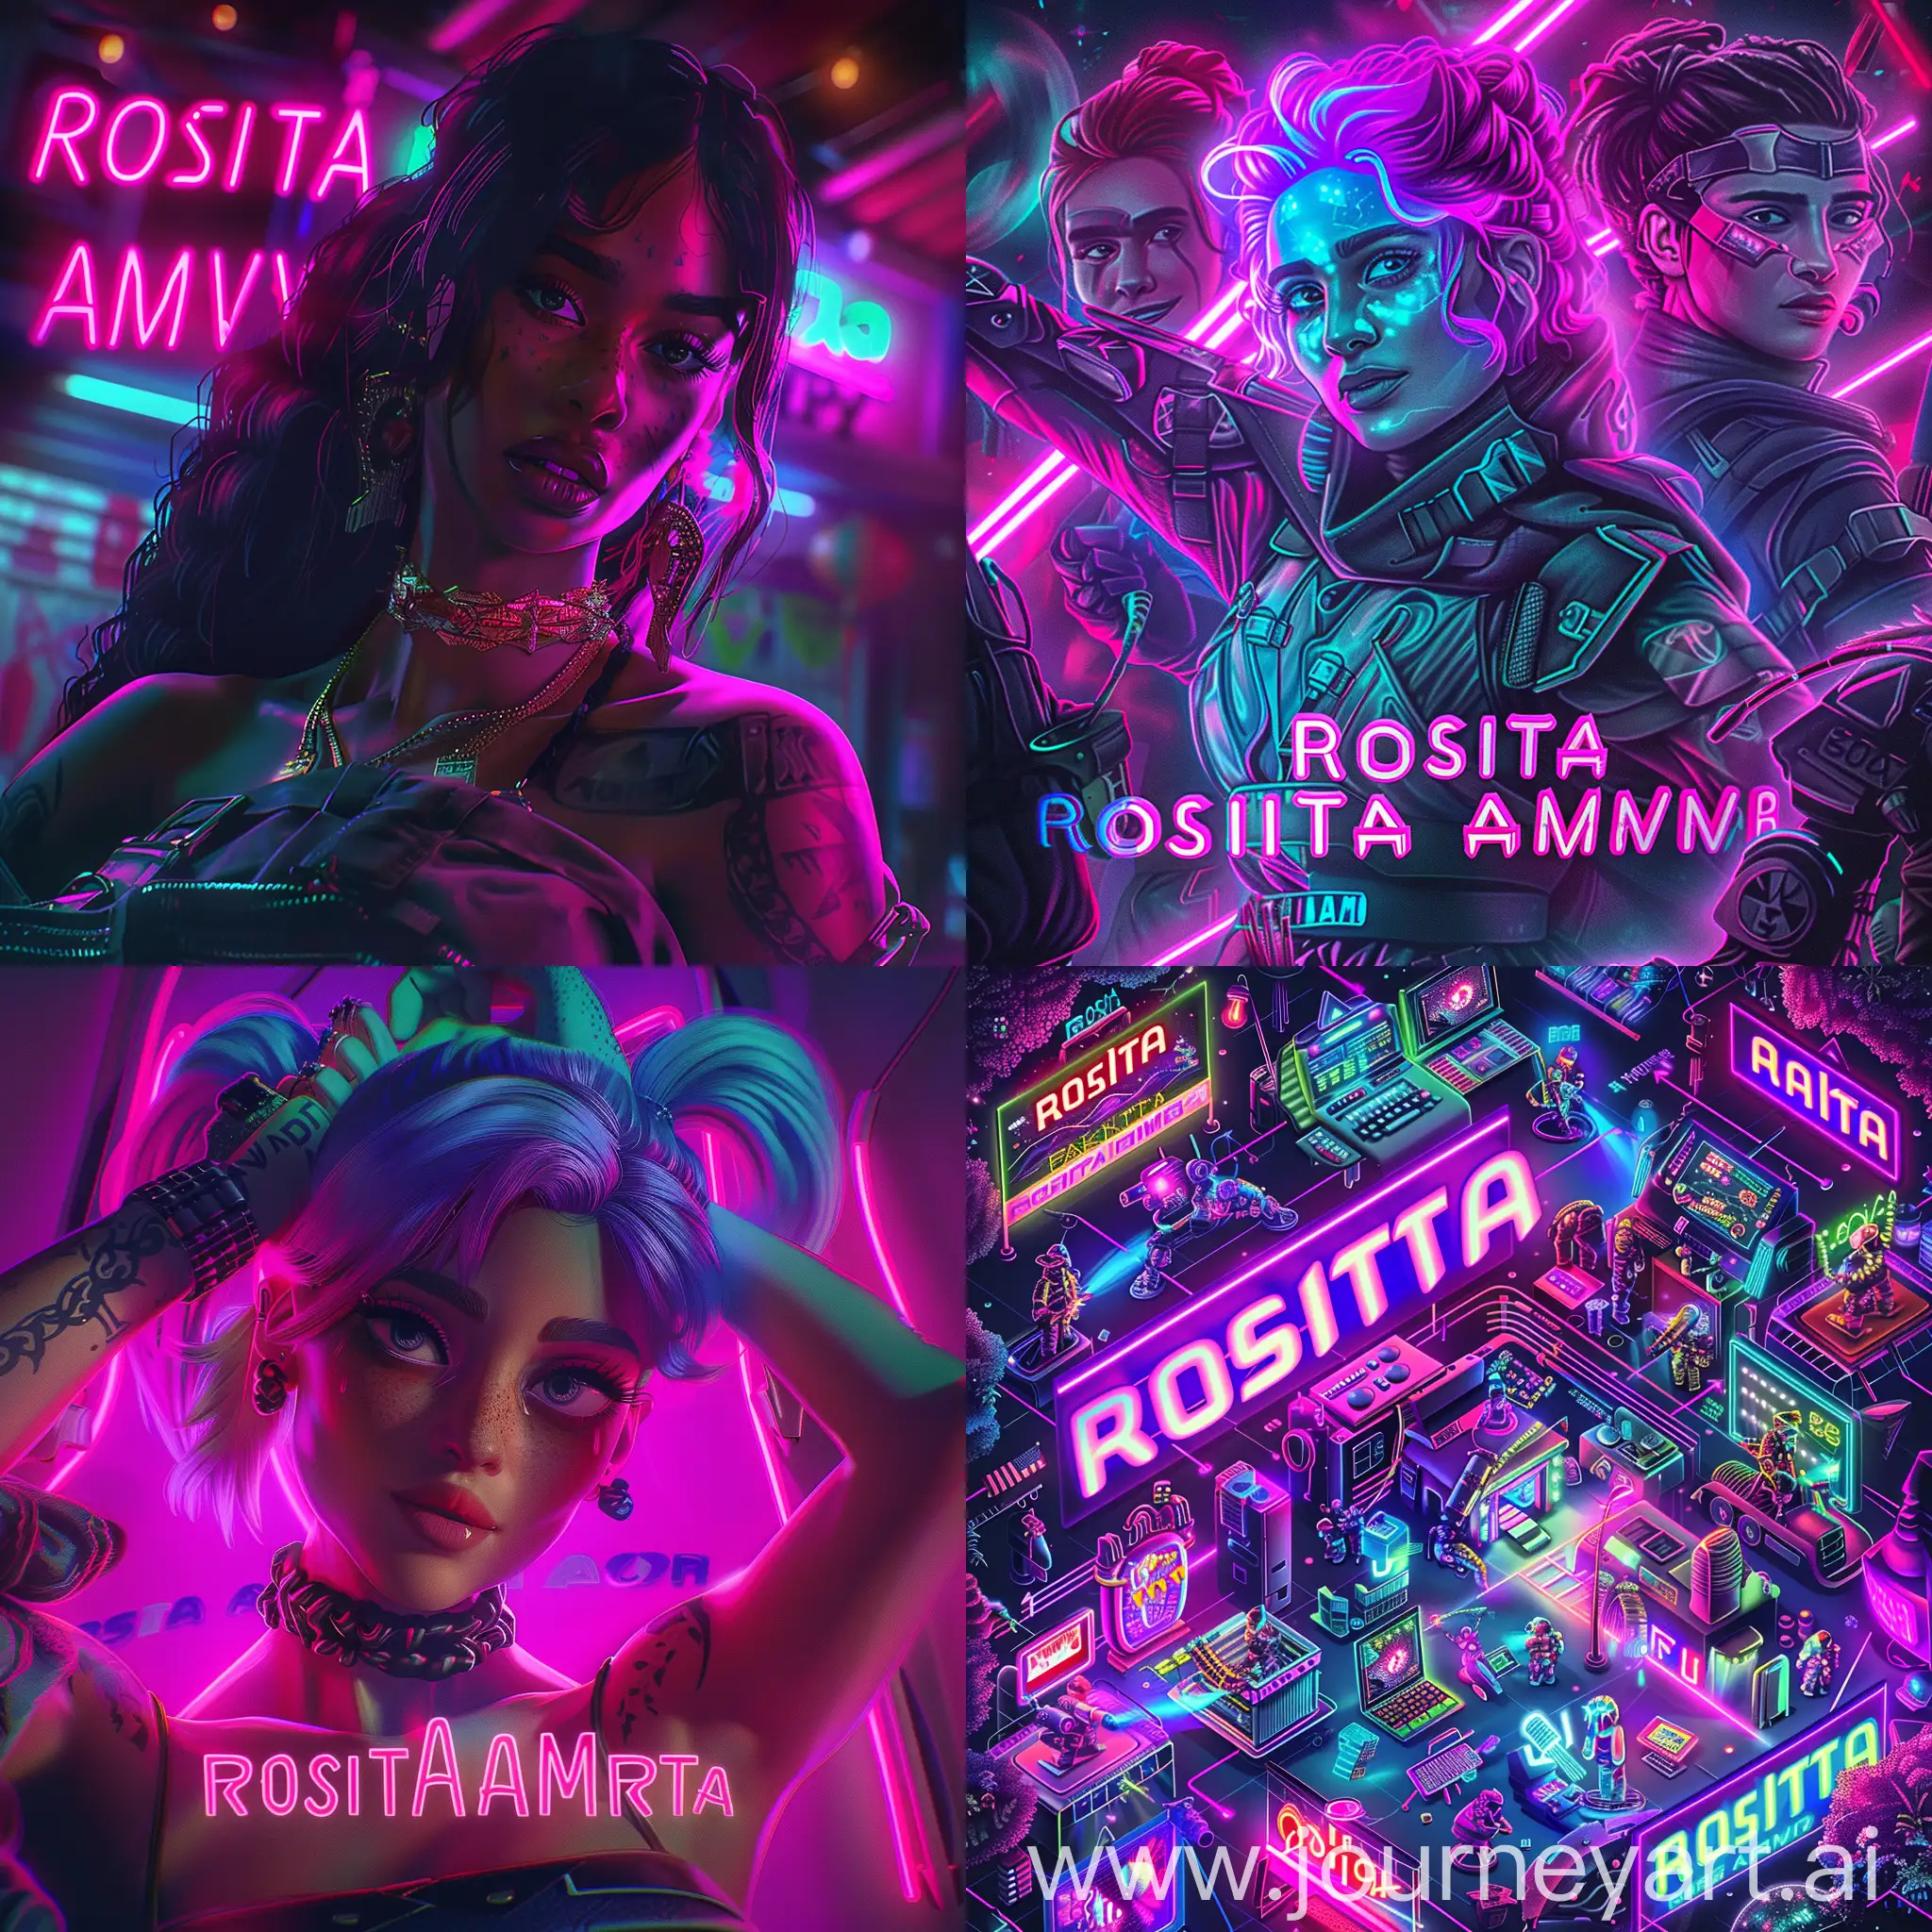 Neon-Space-Background-with-Rosita-Army-Text